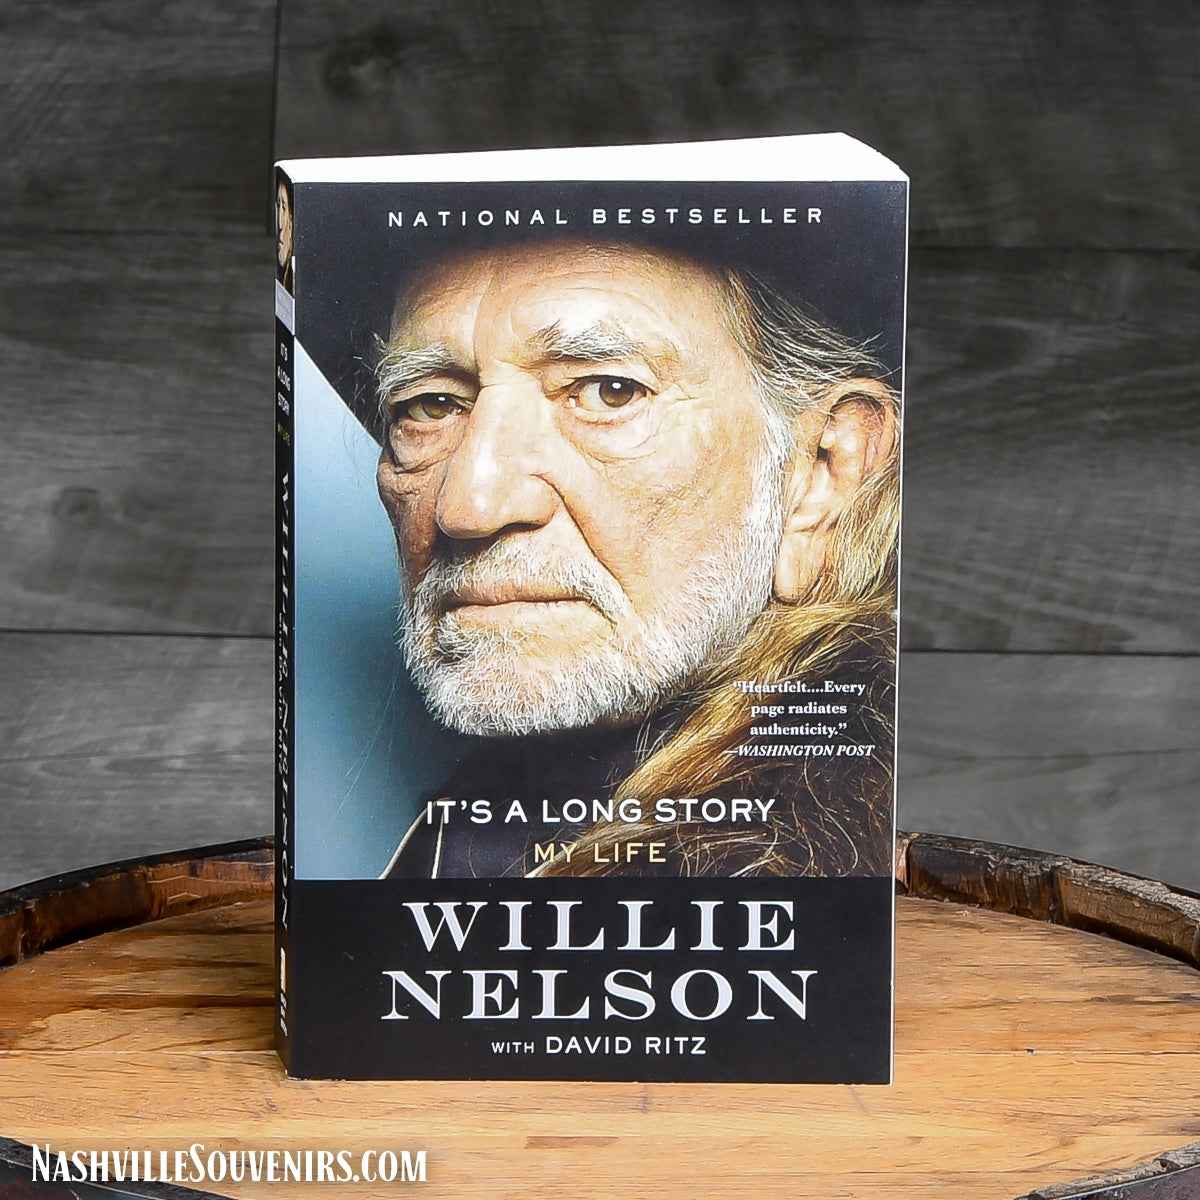 "It's A Long Story" by Willie Nelson